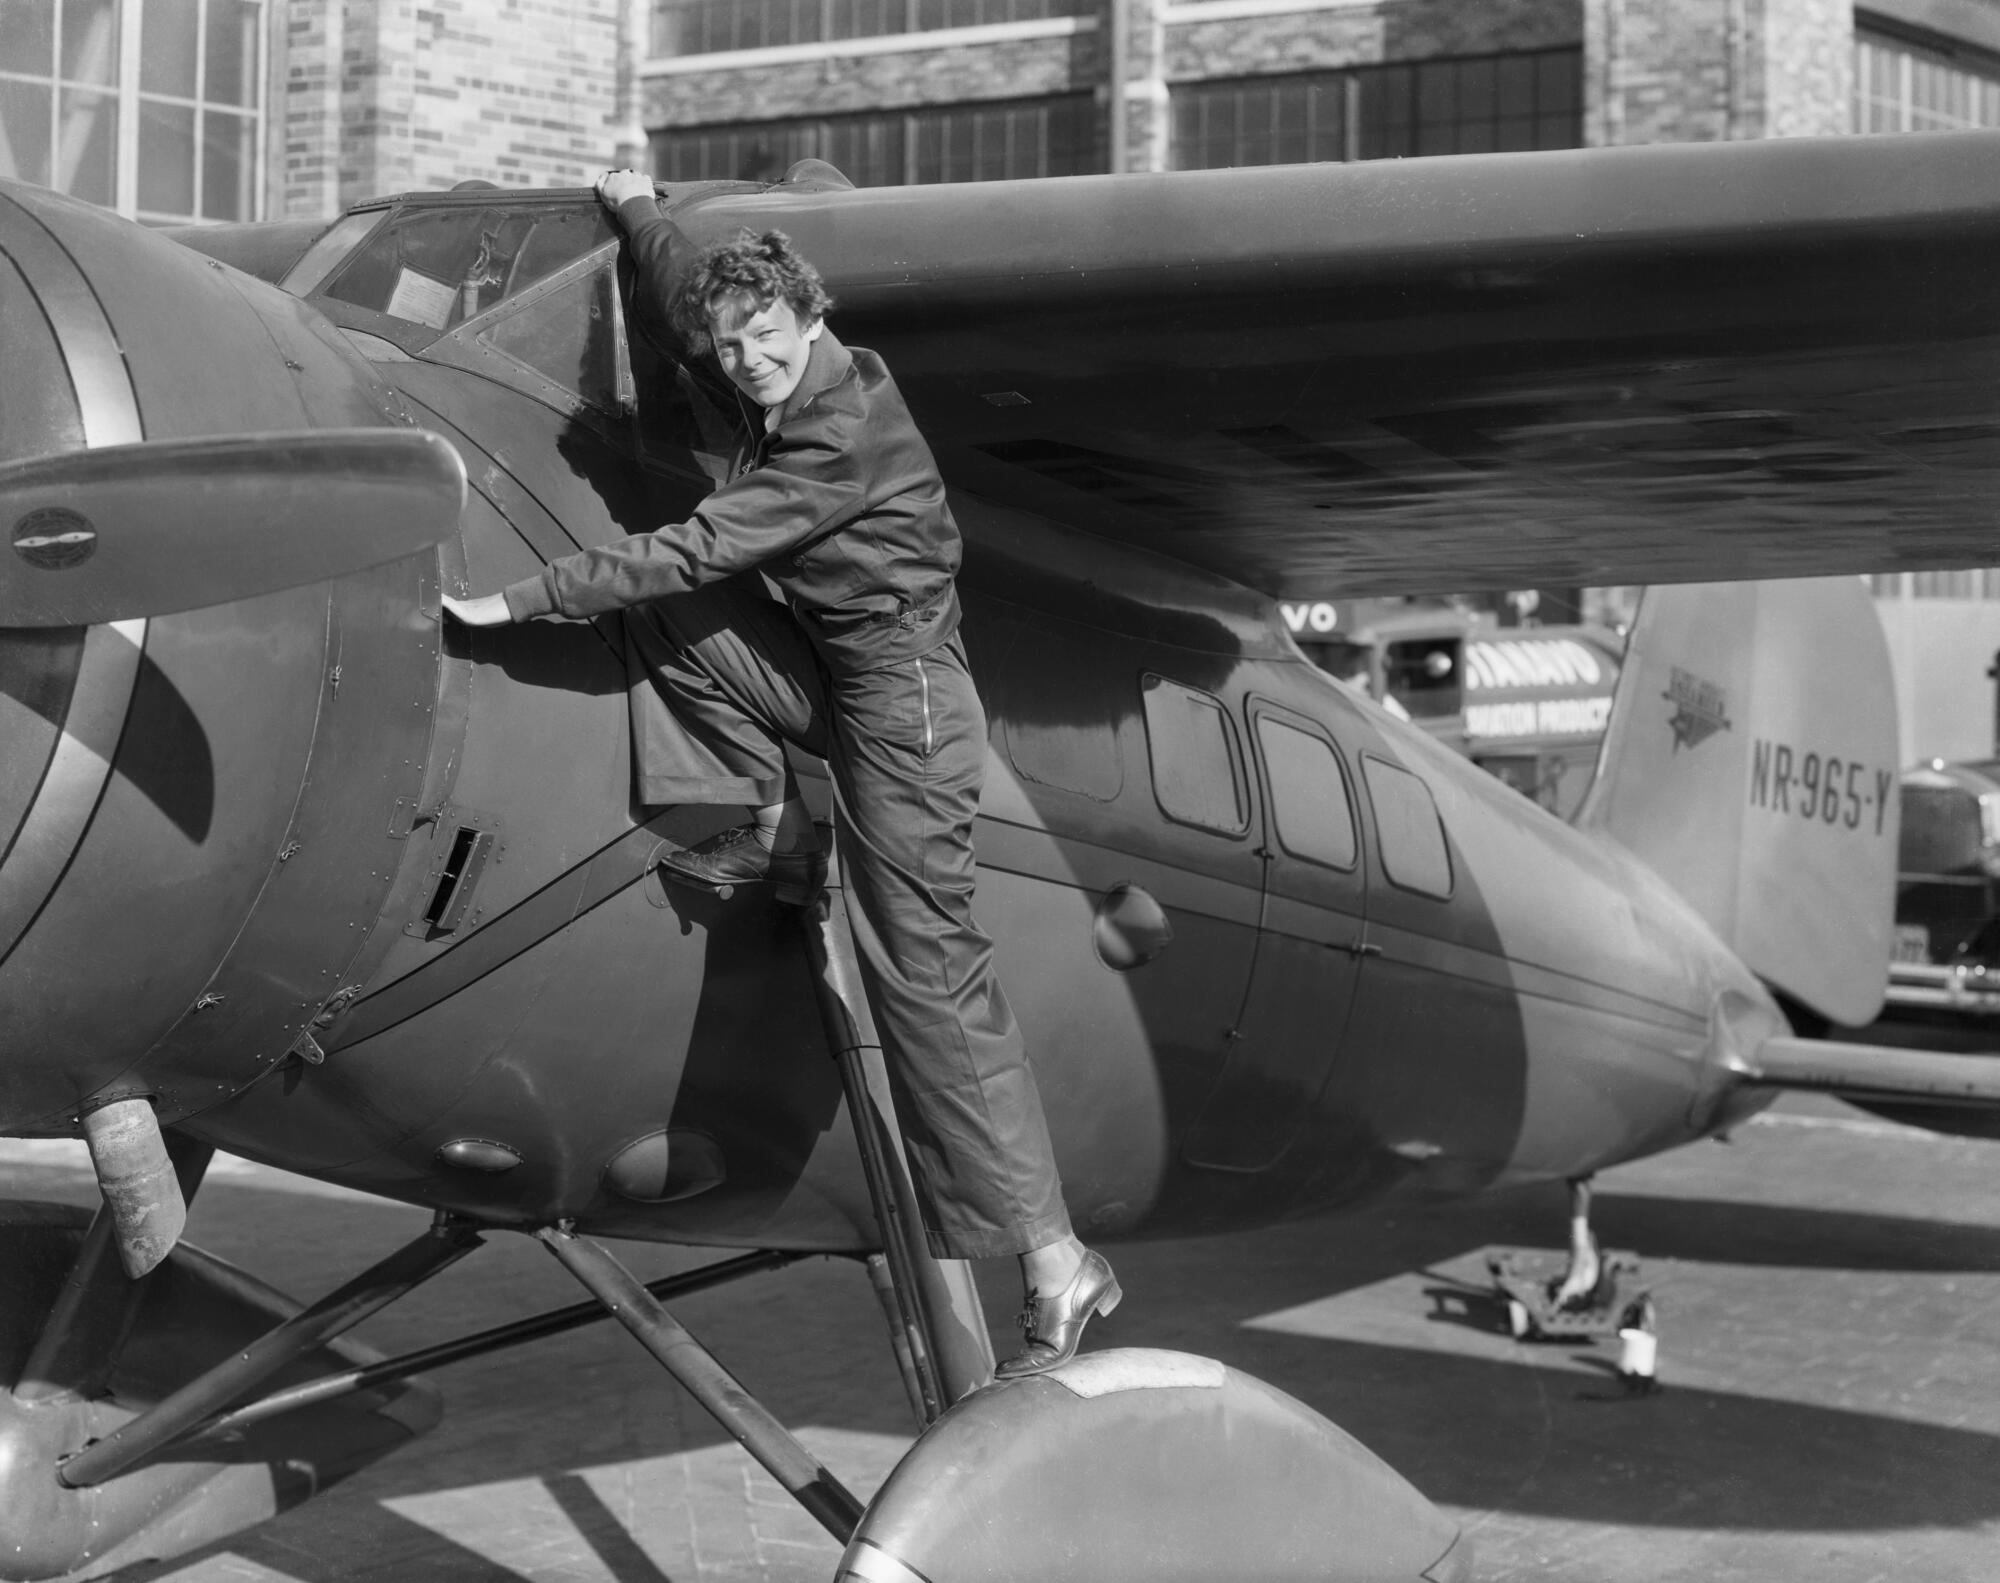 Amelia Earhart stands at the side of a small plane.